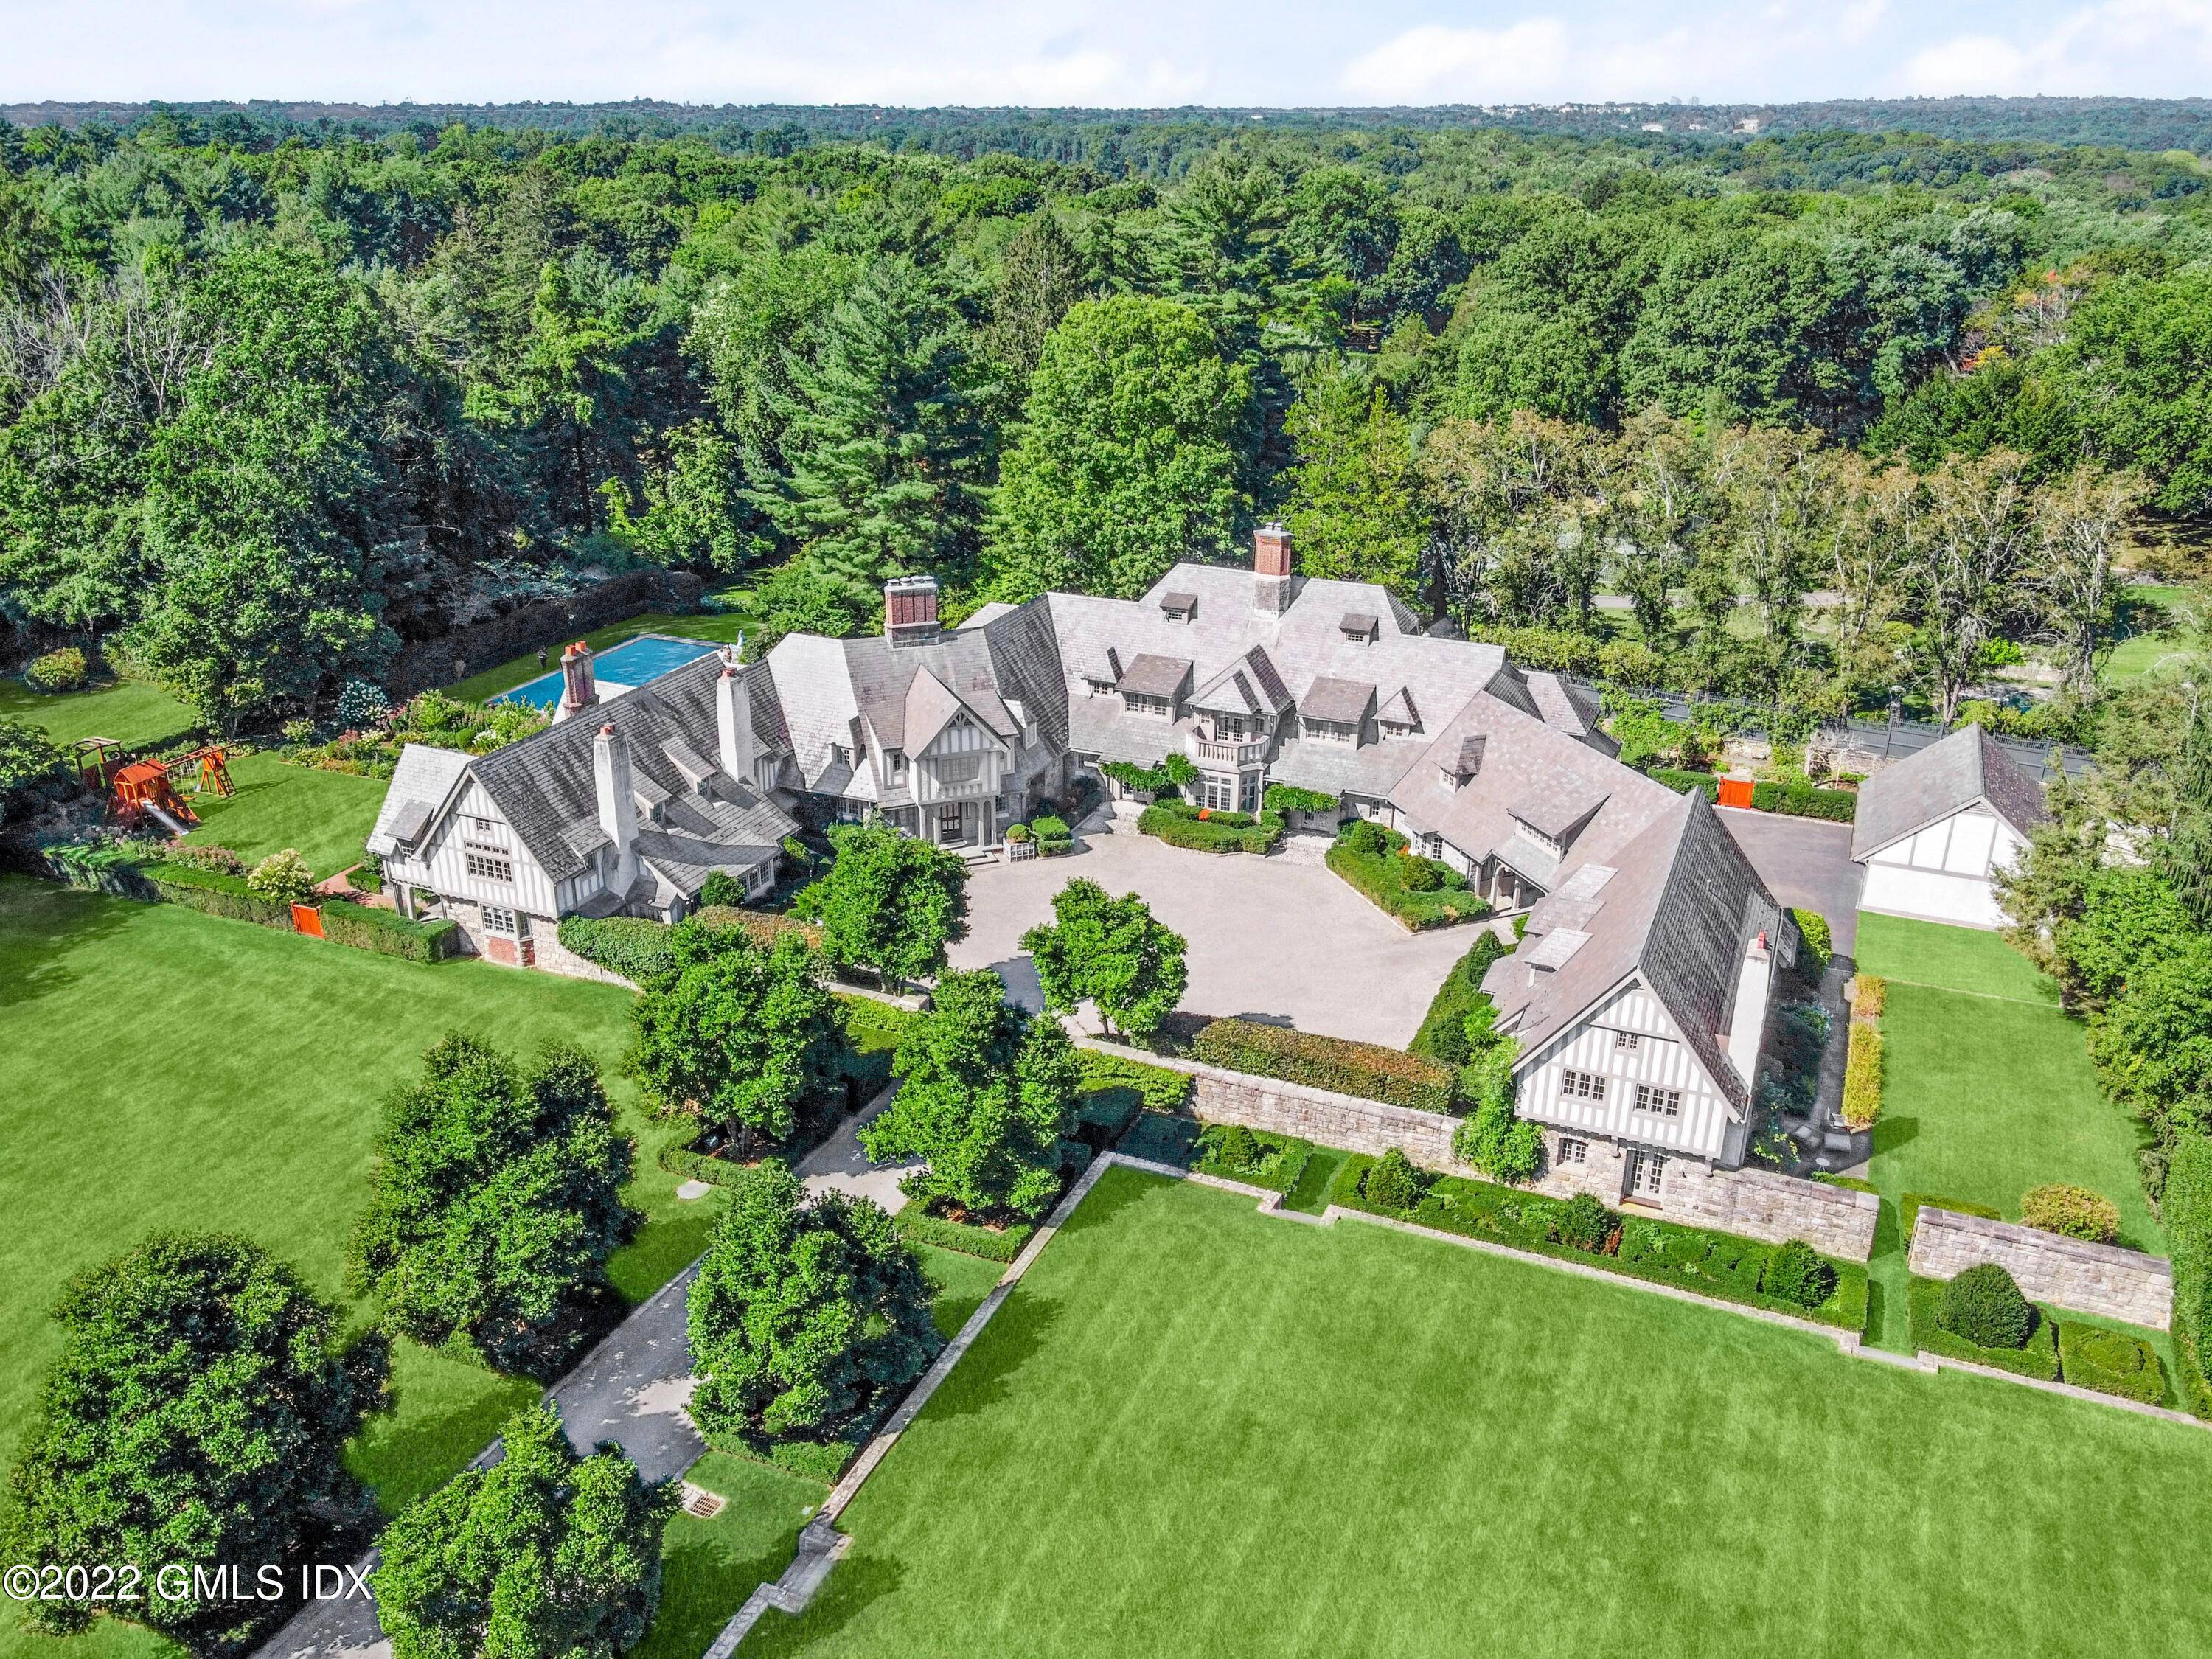 Unrivaled in its beauty, design, build and landscape, this unparalleled Mid Country estate showcases an extensive 4 year restoration and renovation by leading industry visionaries Sam Mitchell and Nordic Builders.